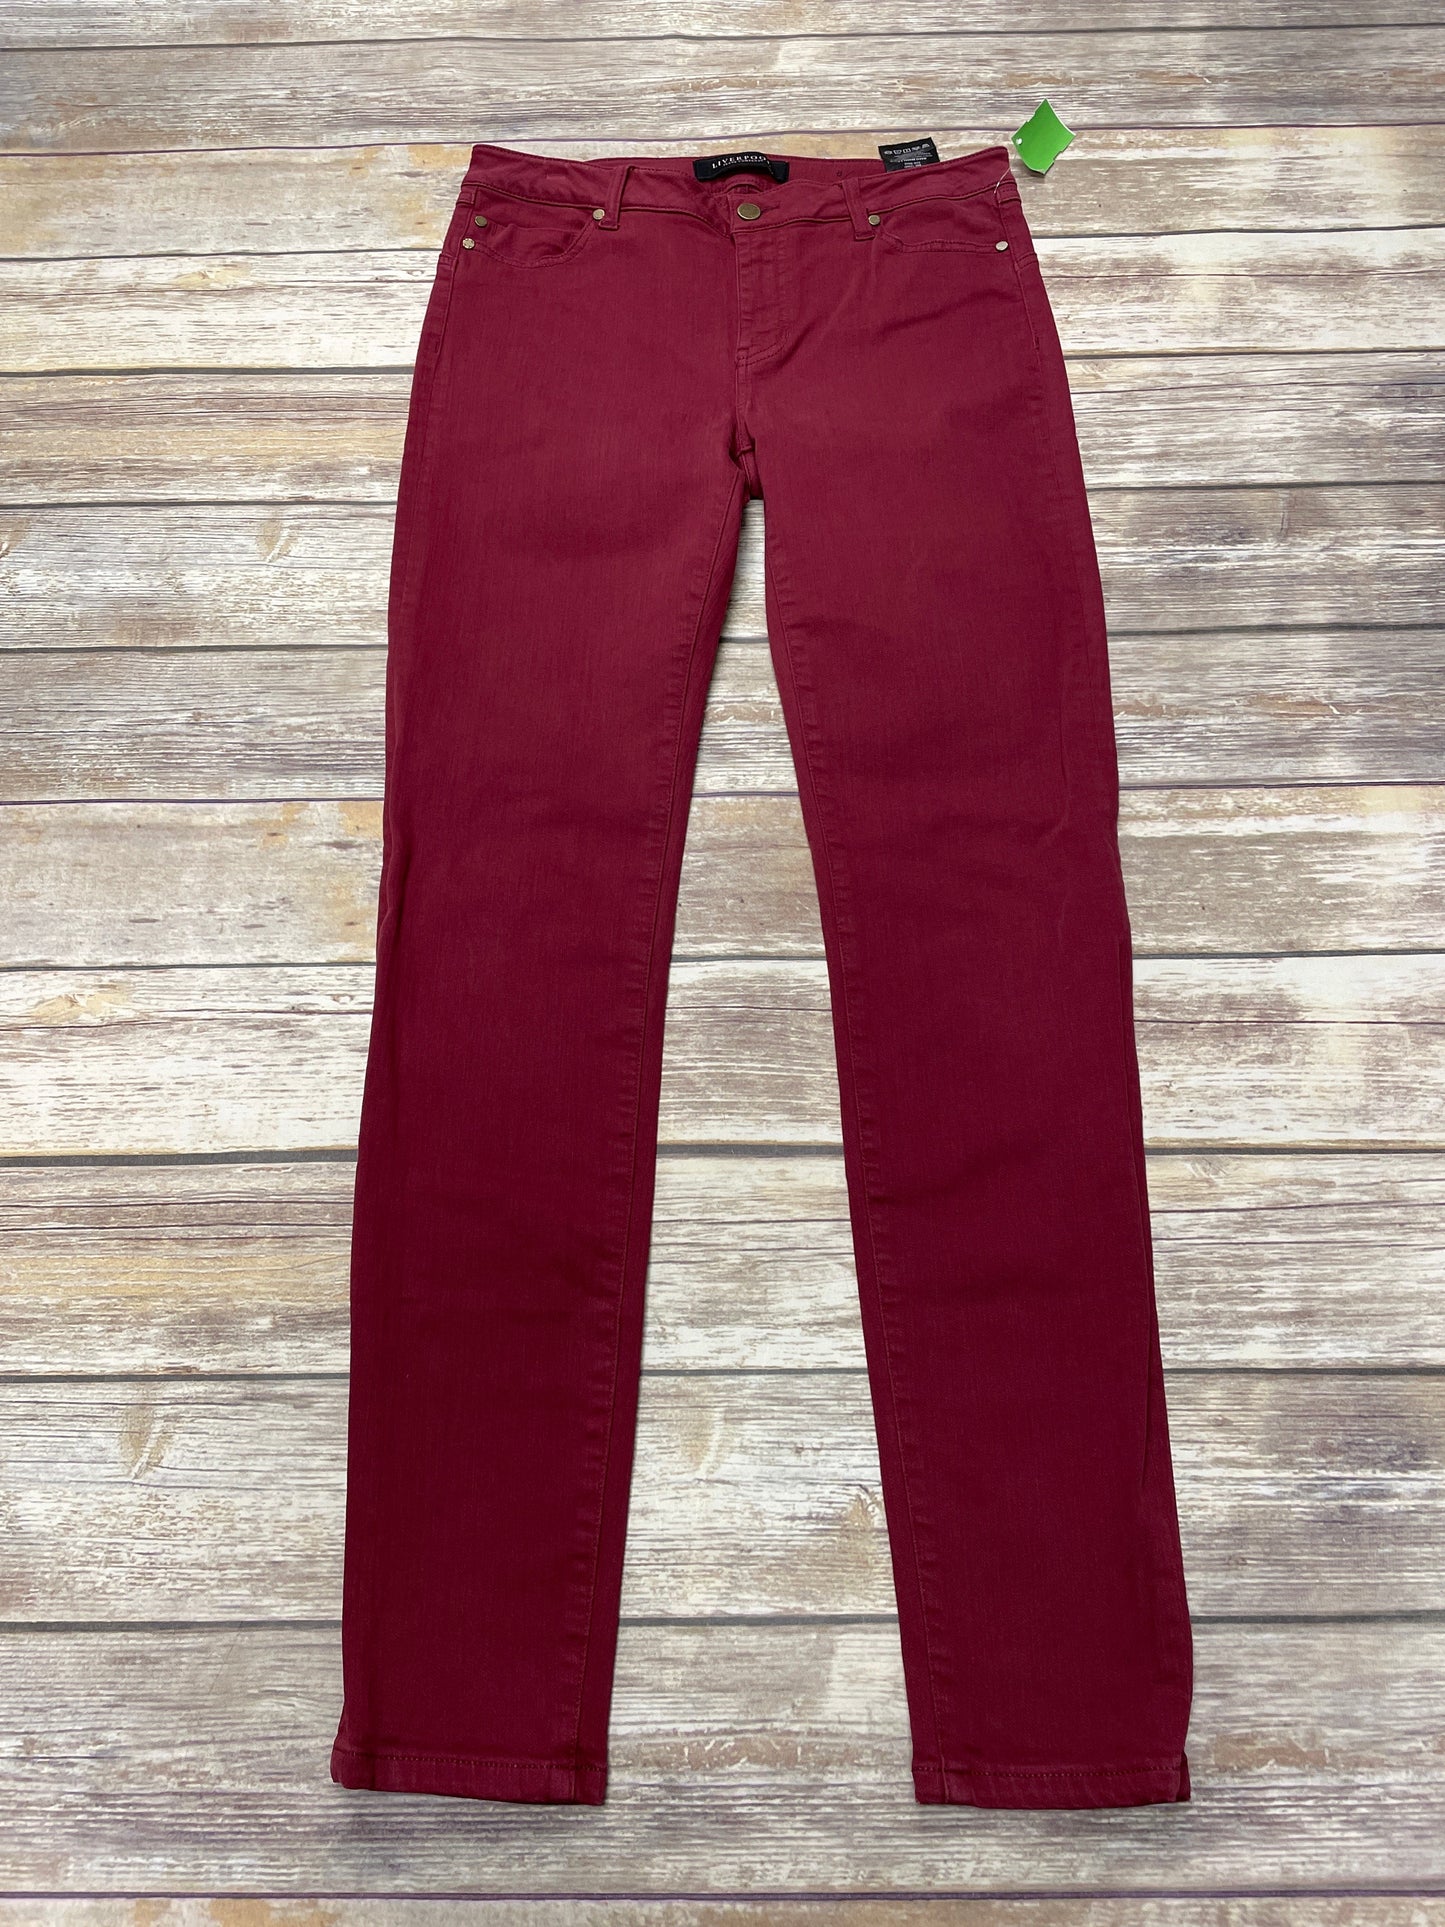 Red Jeans Skinny Liverpool, Size 8